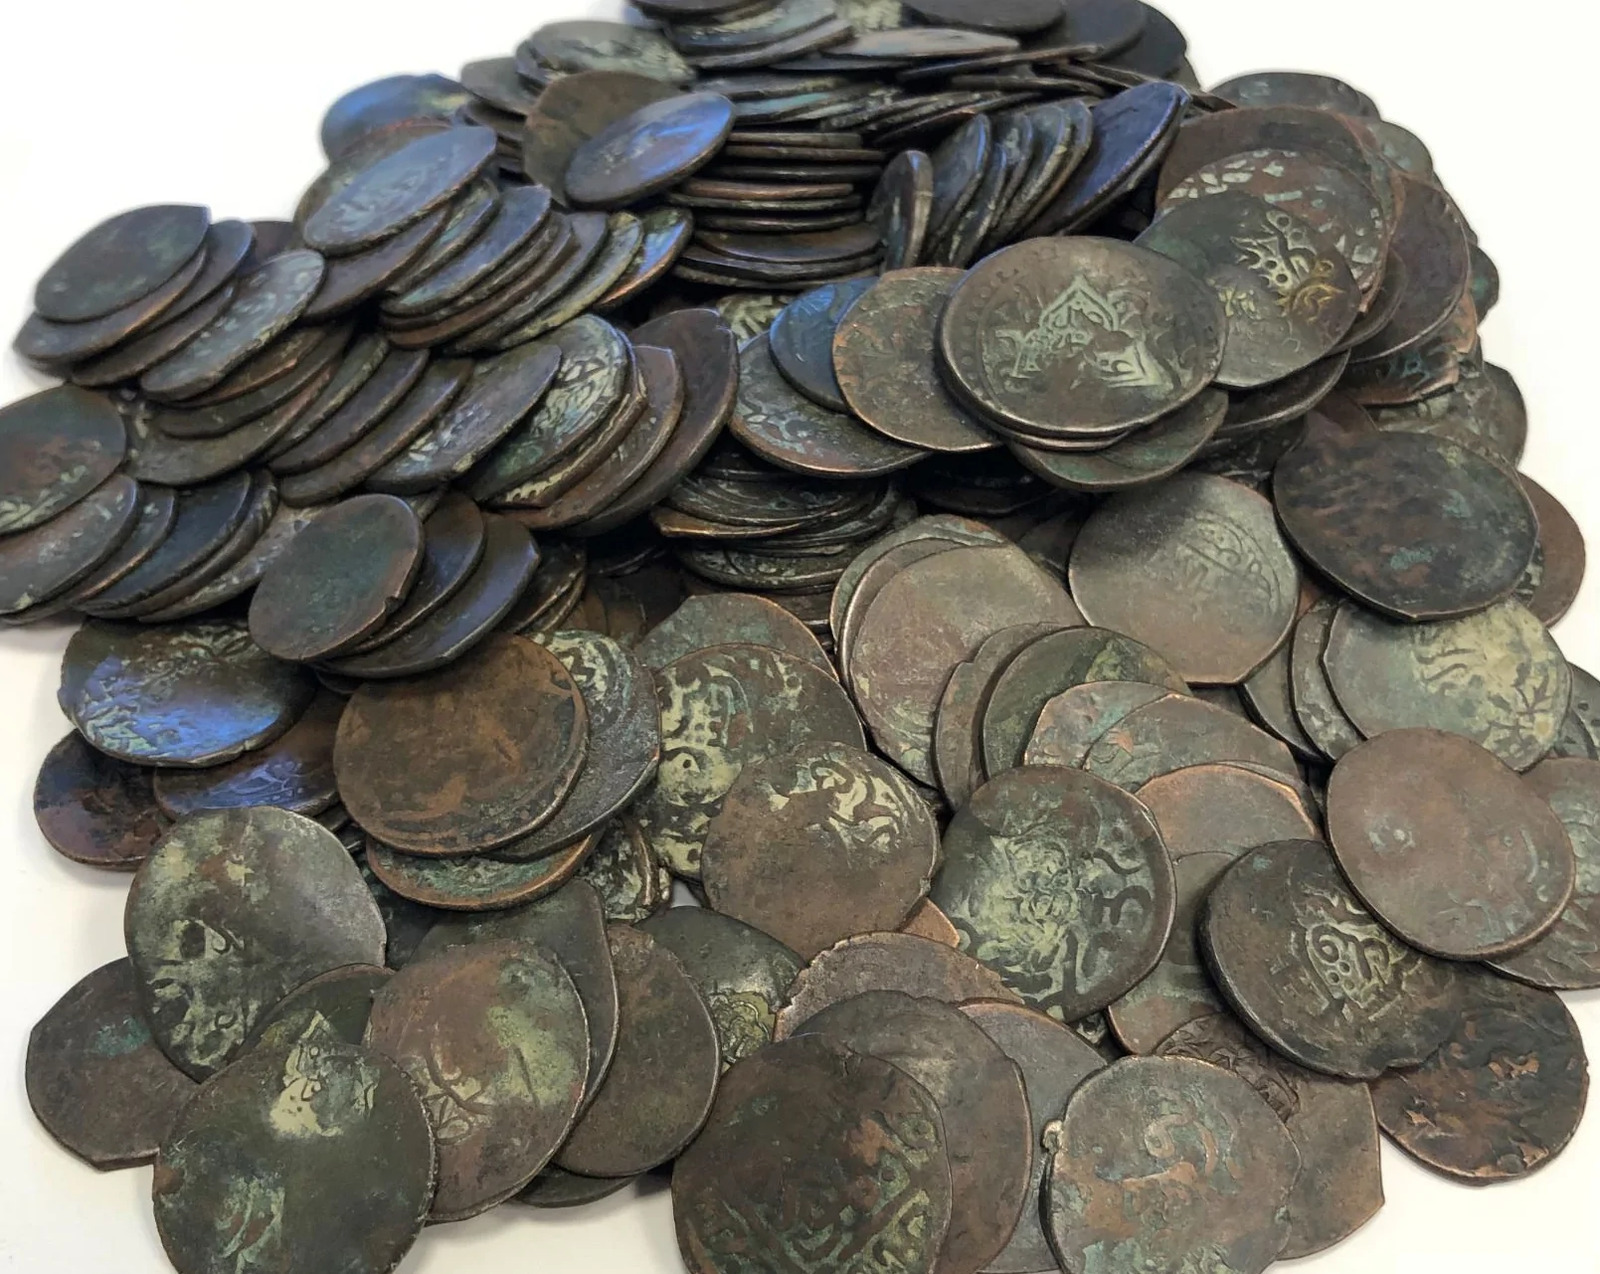 Mittelalter Lot of 25 Central Asian large copper coins, c.1400-1600, many  w/countermarks